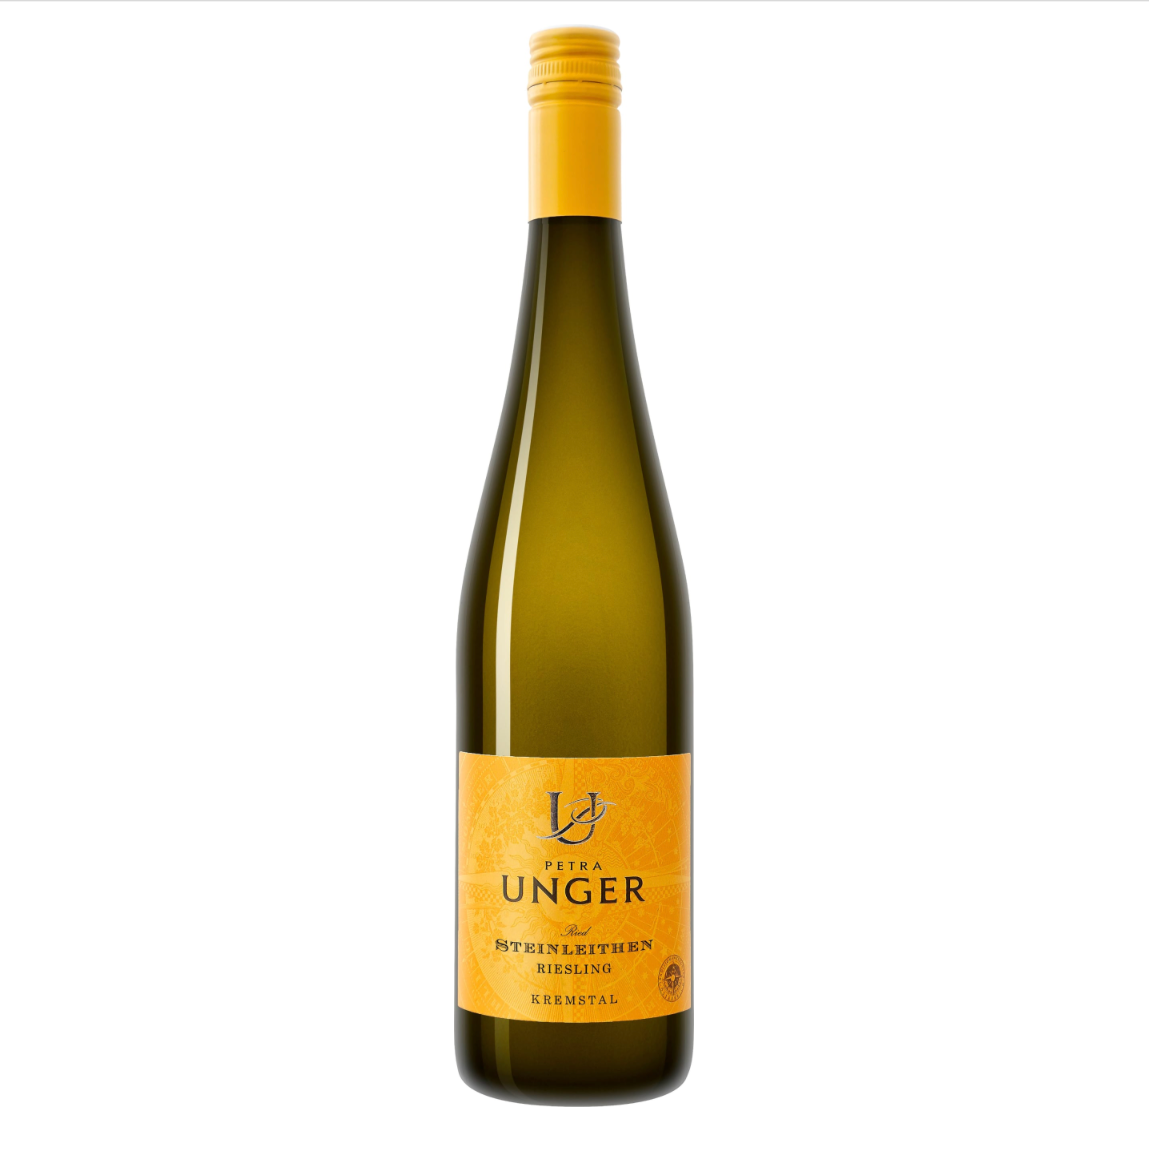 Petra Unger, Ried Steinleithen Riesling 2021